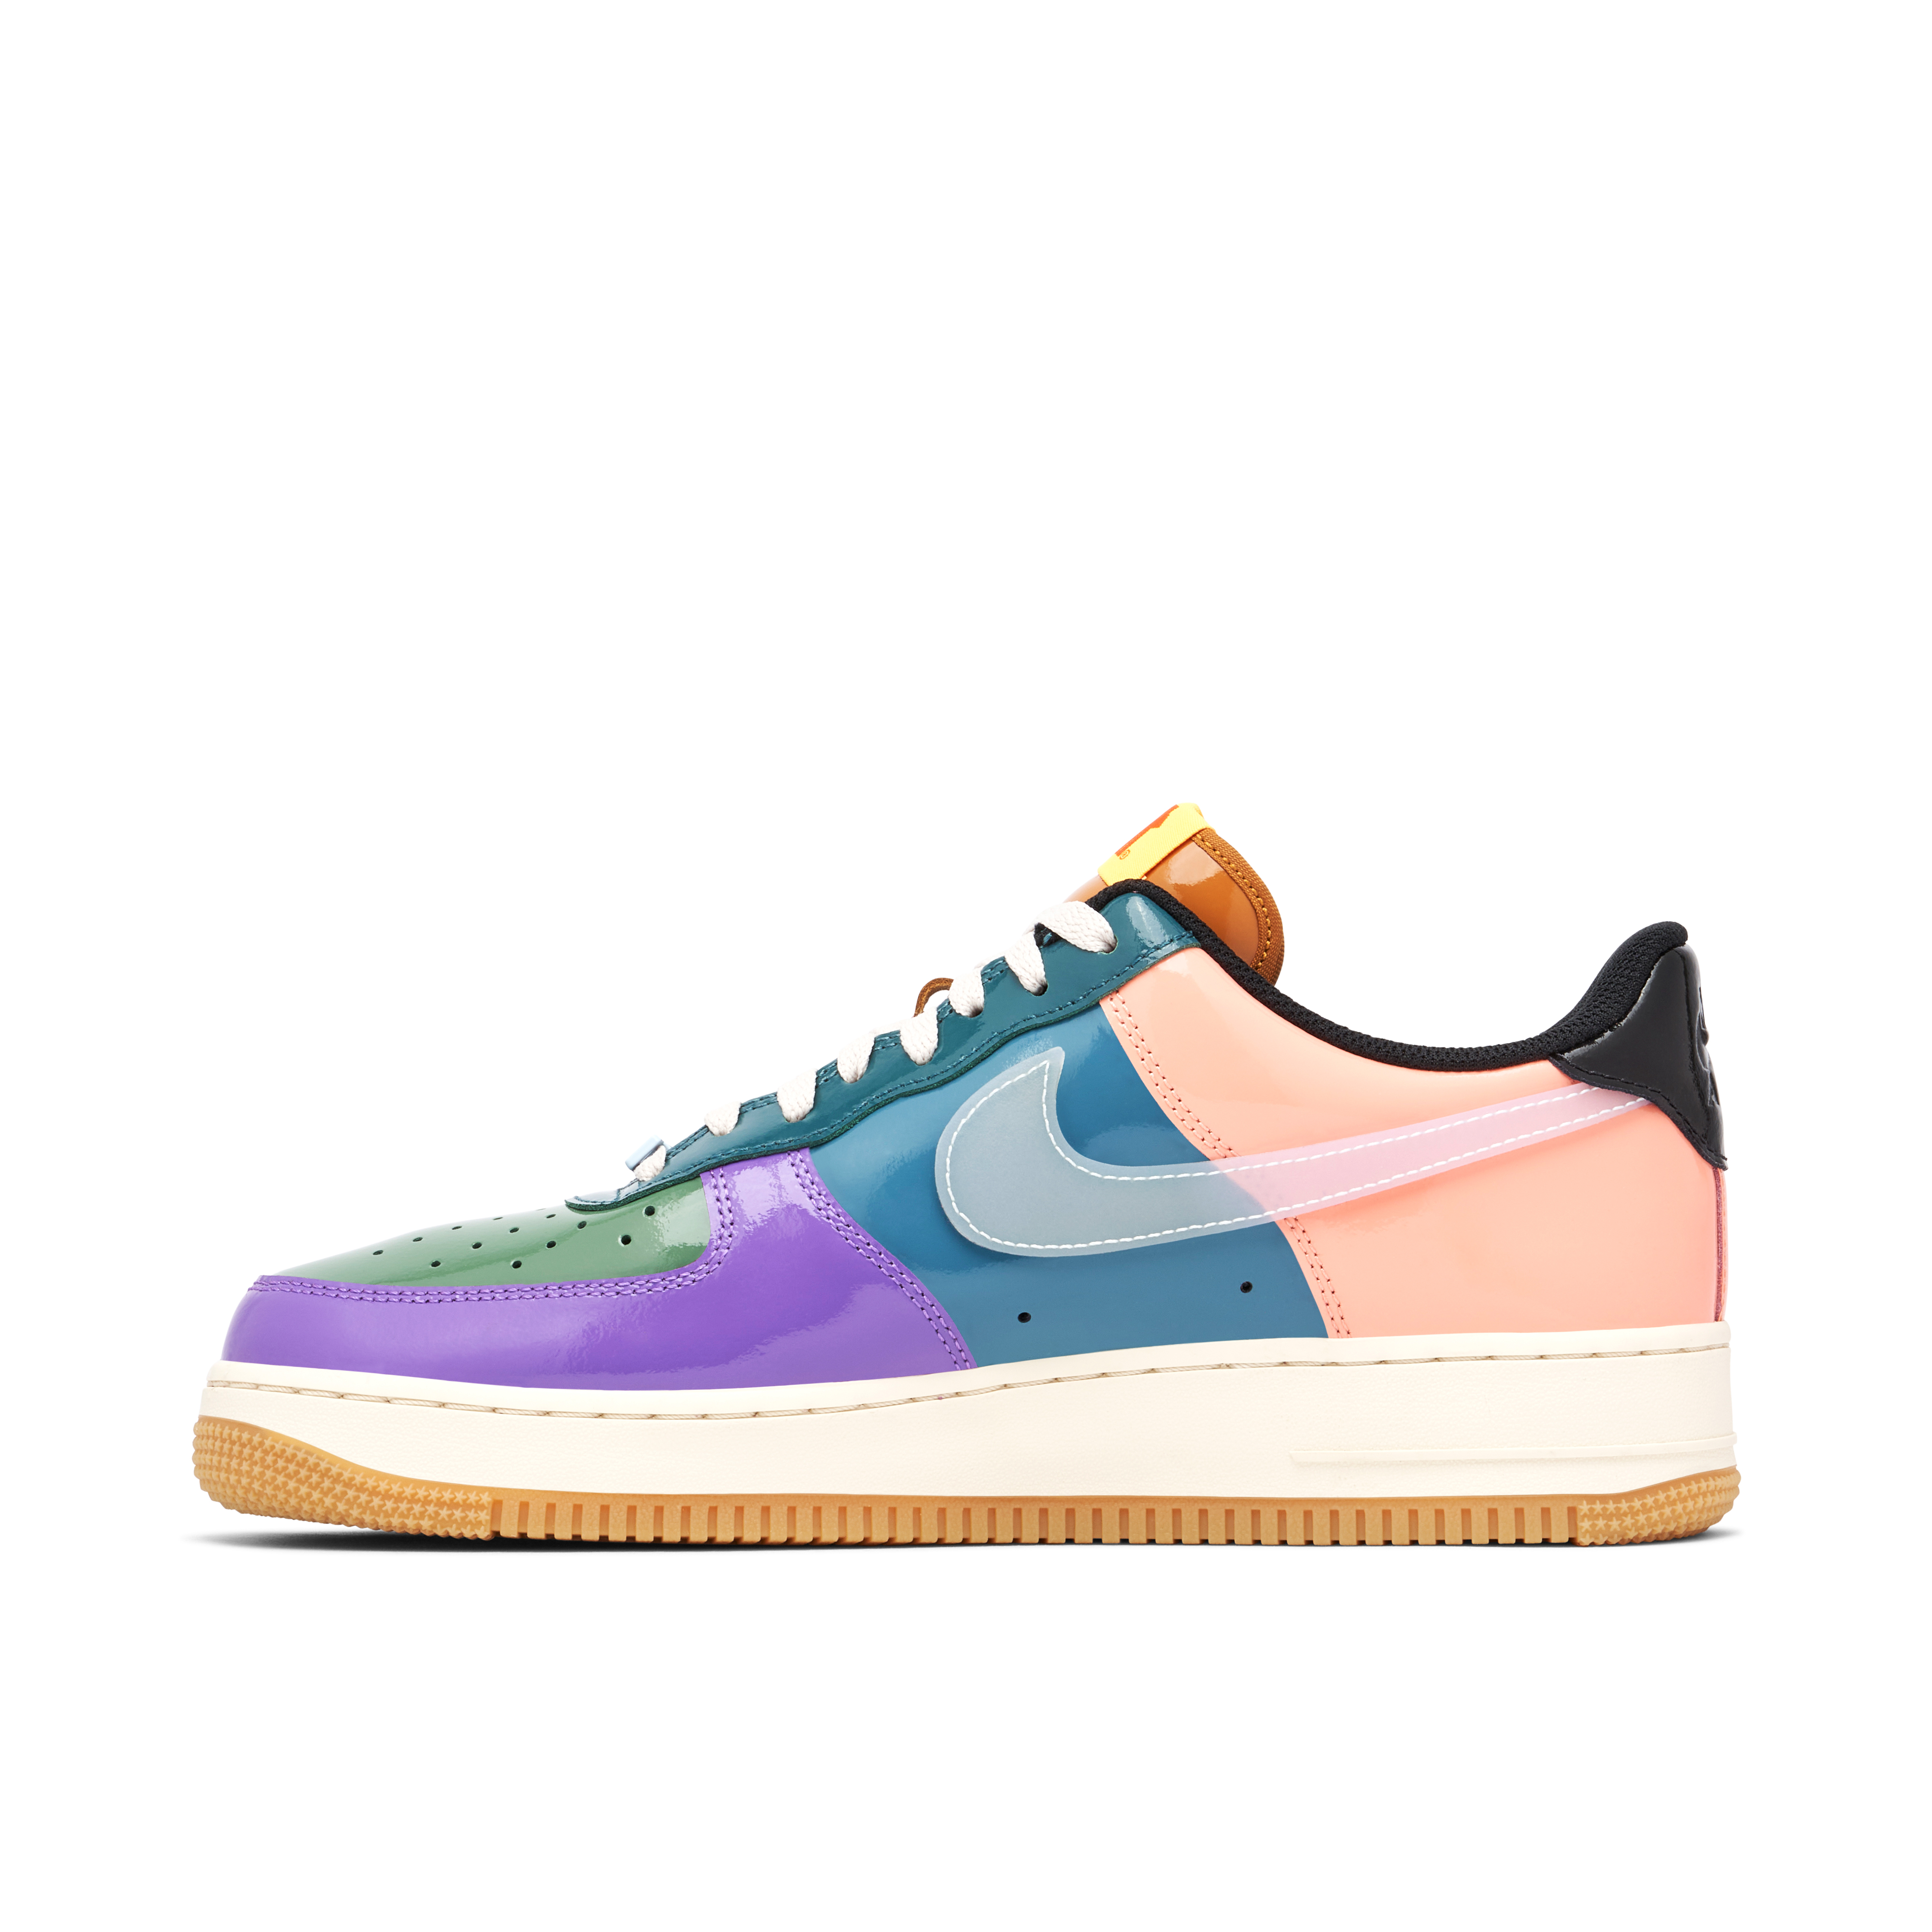 Nike Air Force 1 Low x Undefeated Celestine Blue | DV5255-500 | Laced